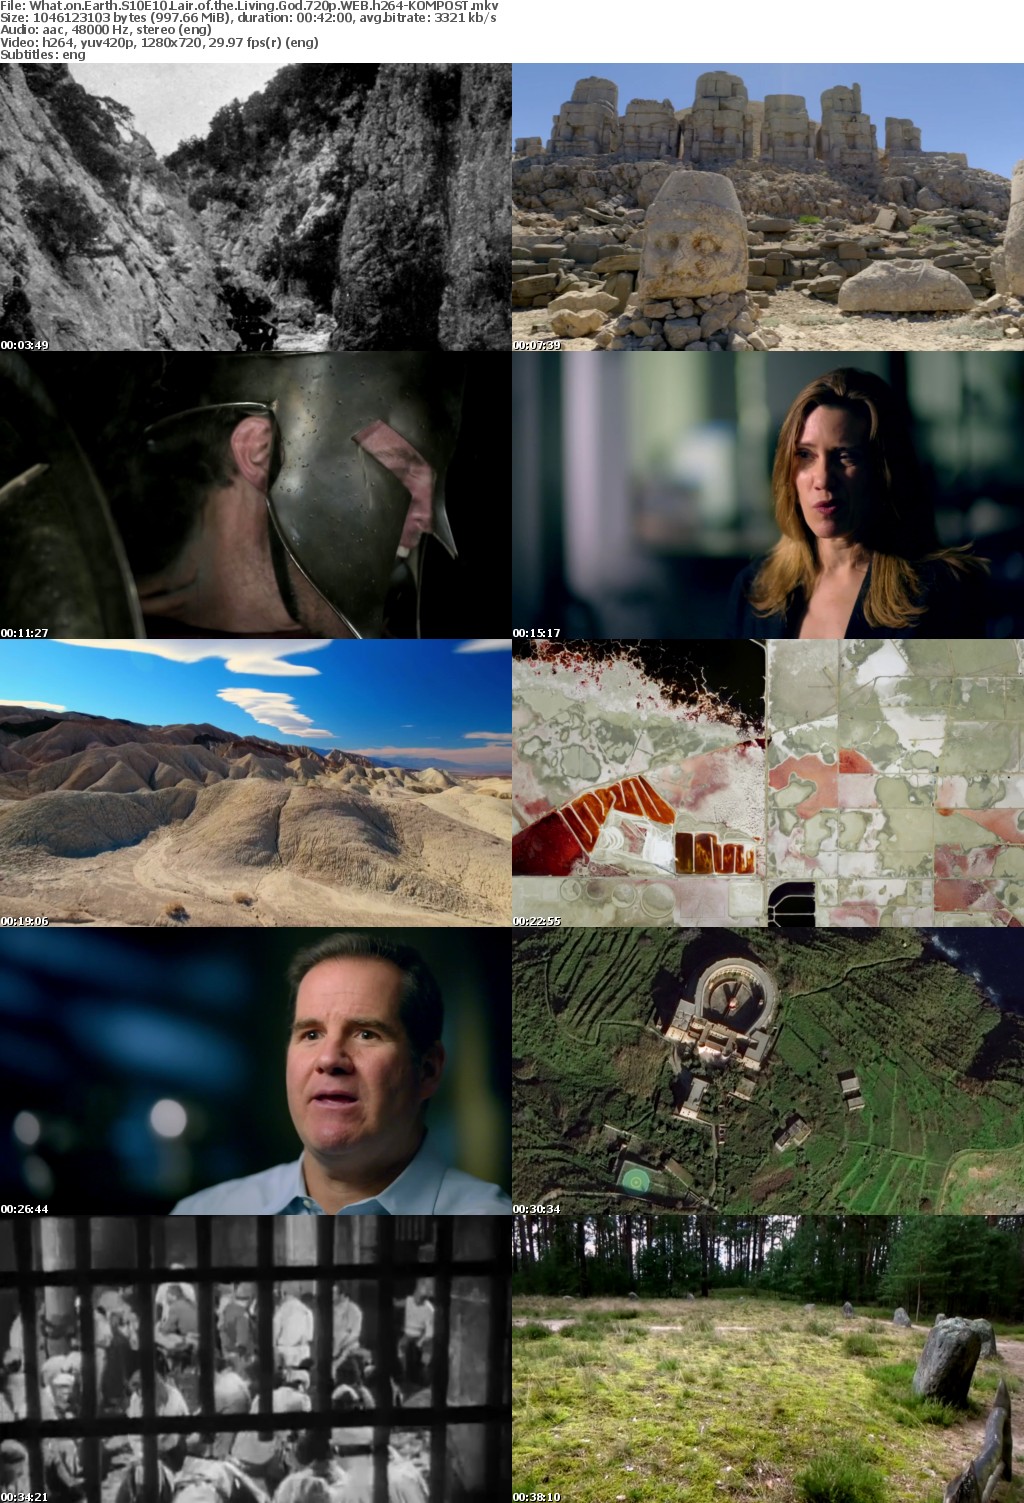 What on Earth S10E10 Lair of the Living God 720p WEB h264-KOMPOST